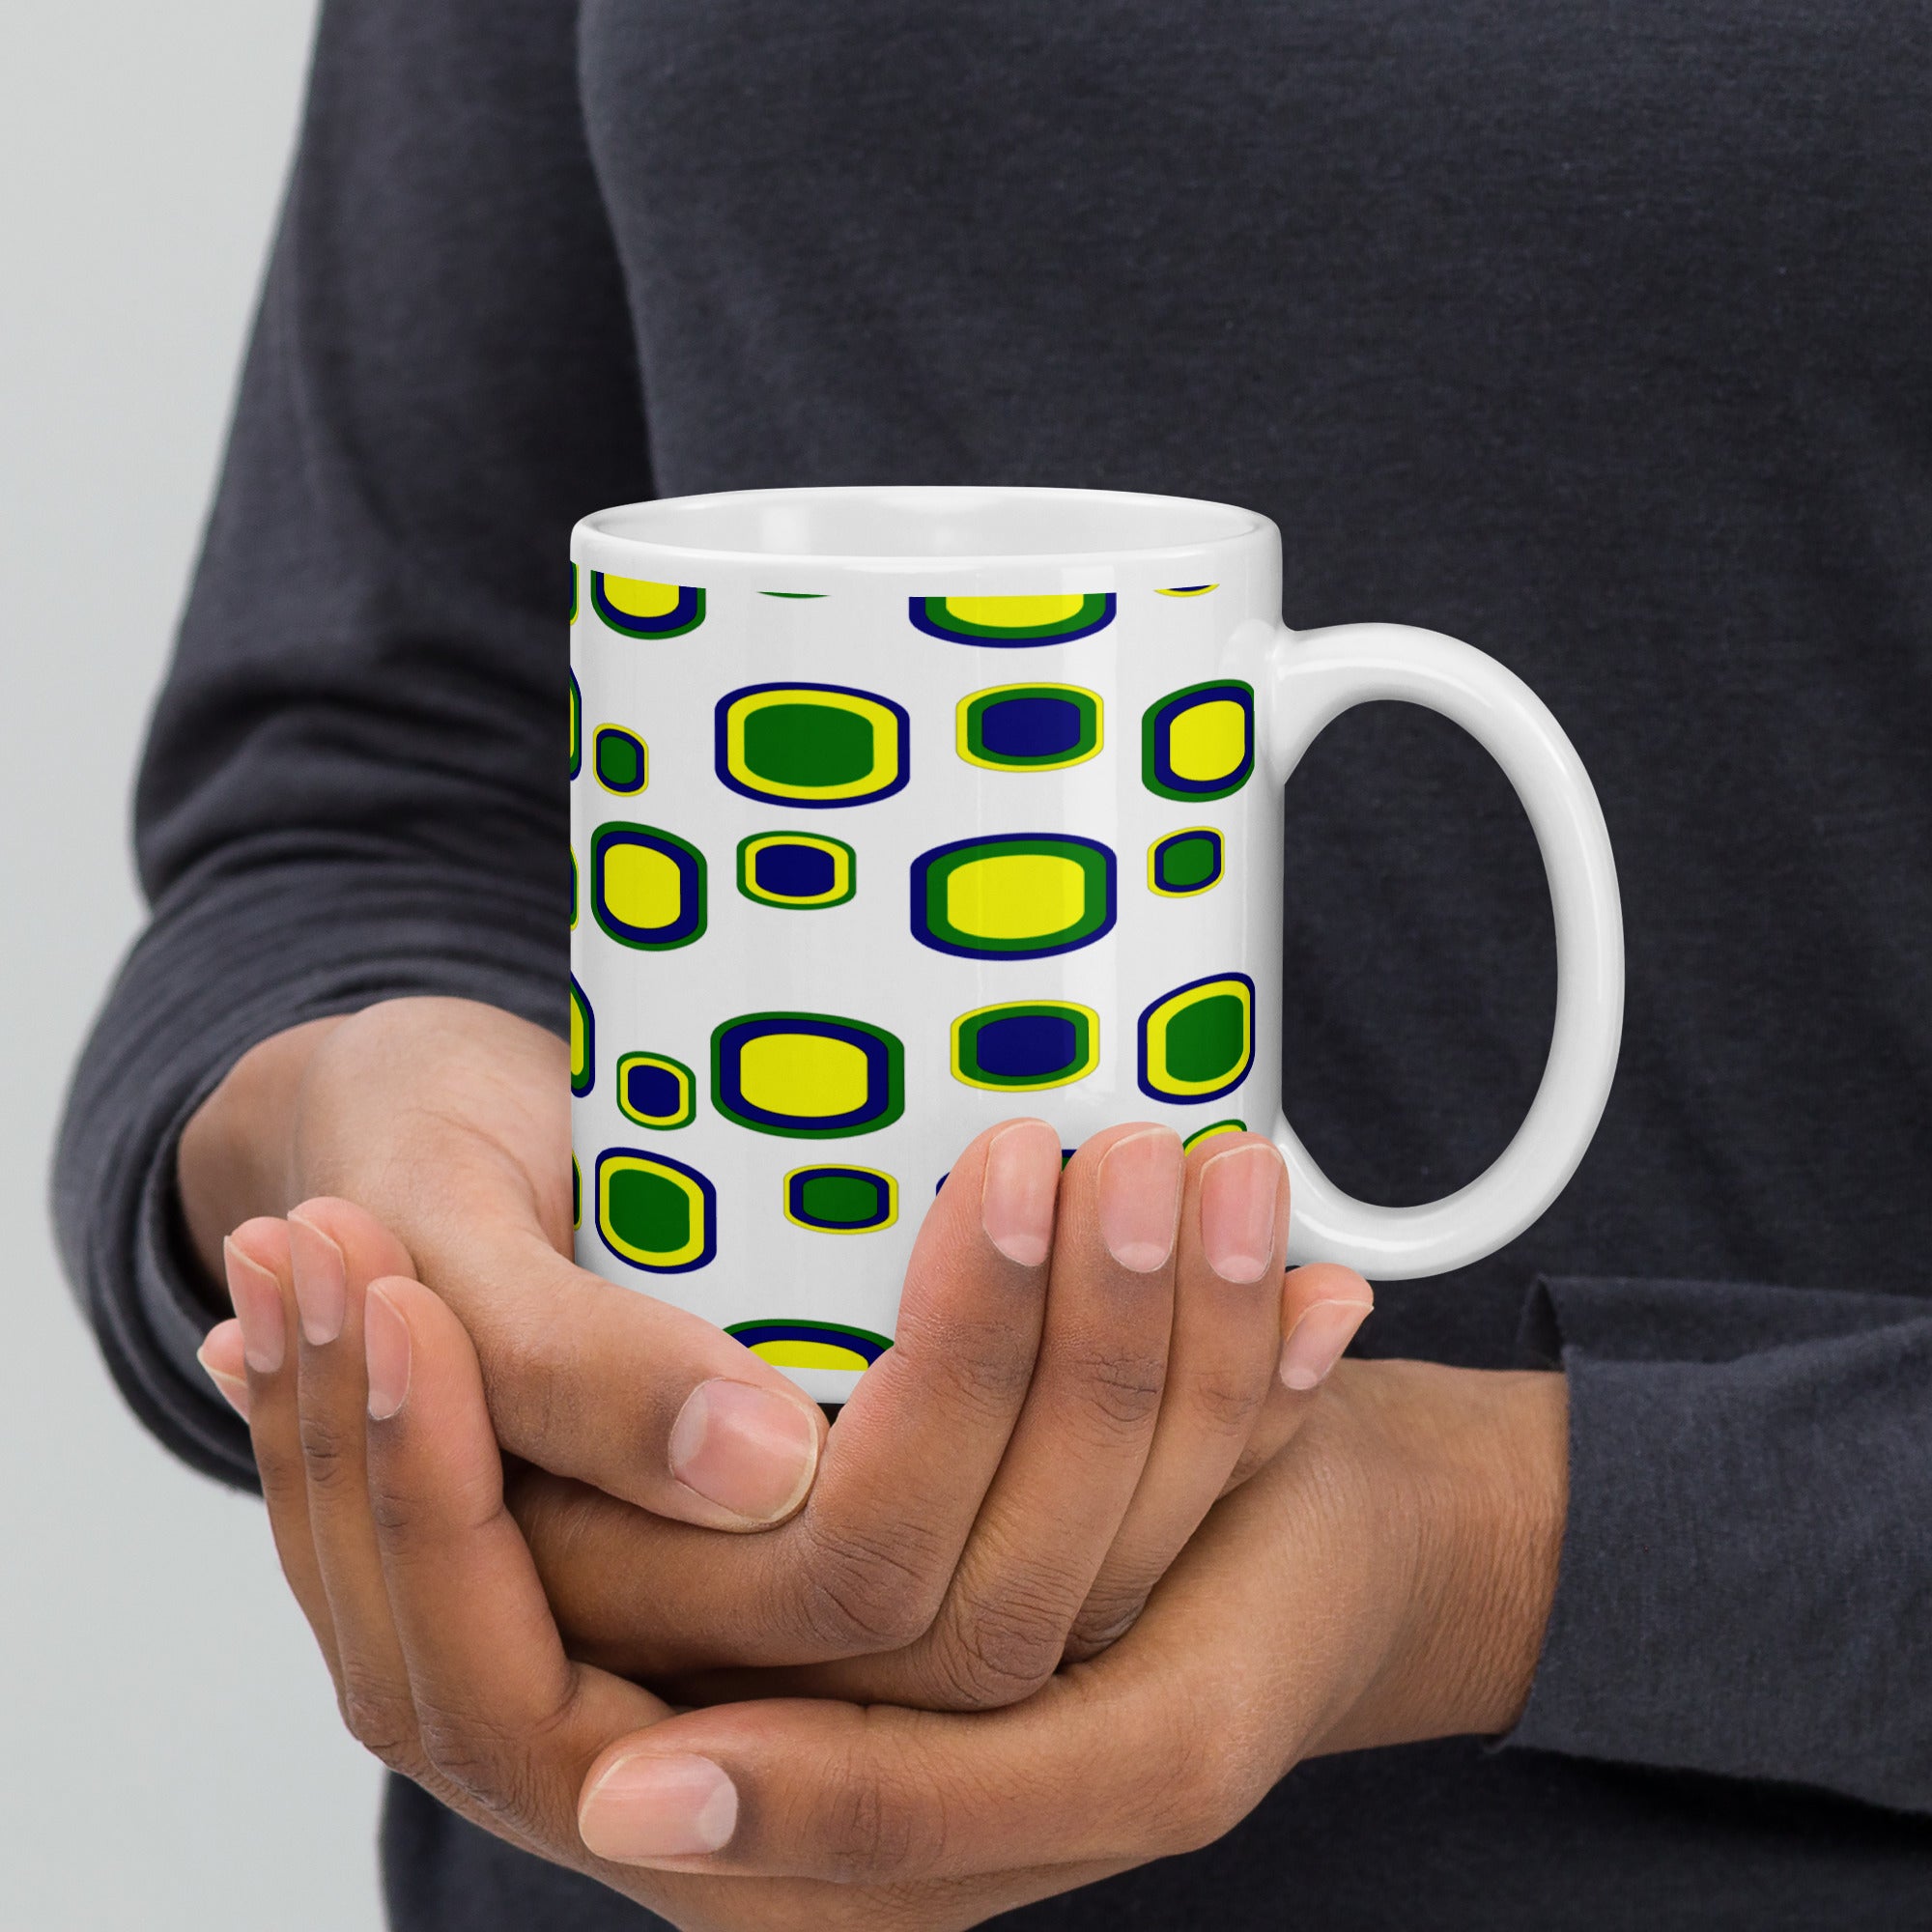 St. Vincent and the Grenadines Vincy Cubes White glossy mug